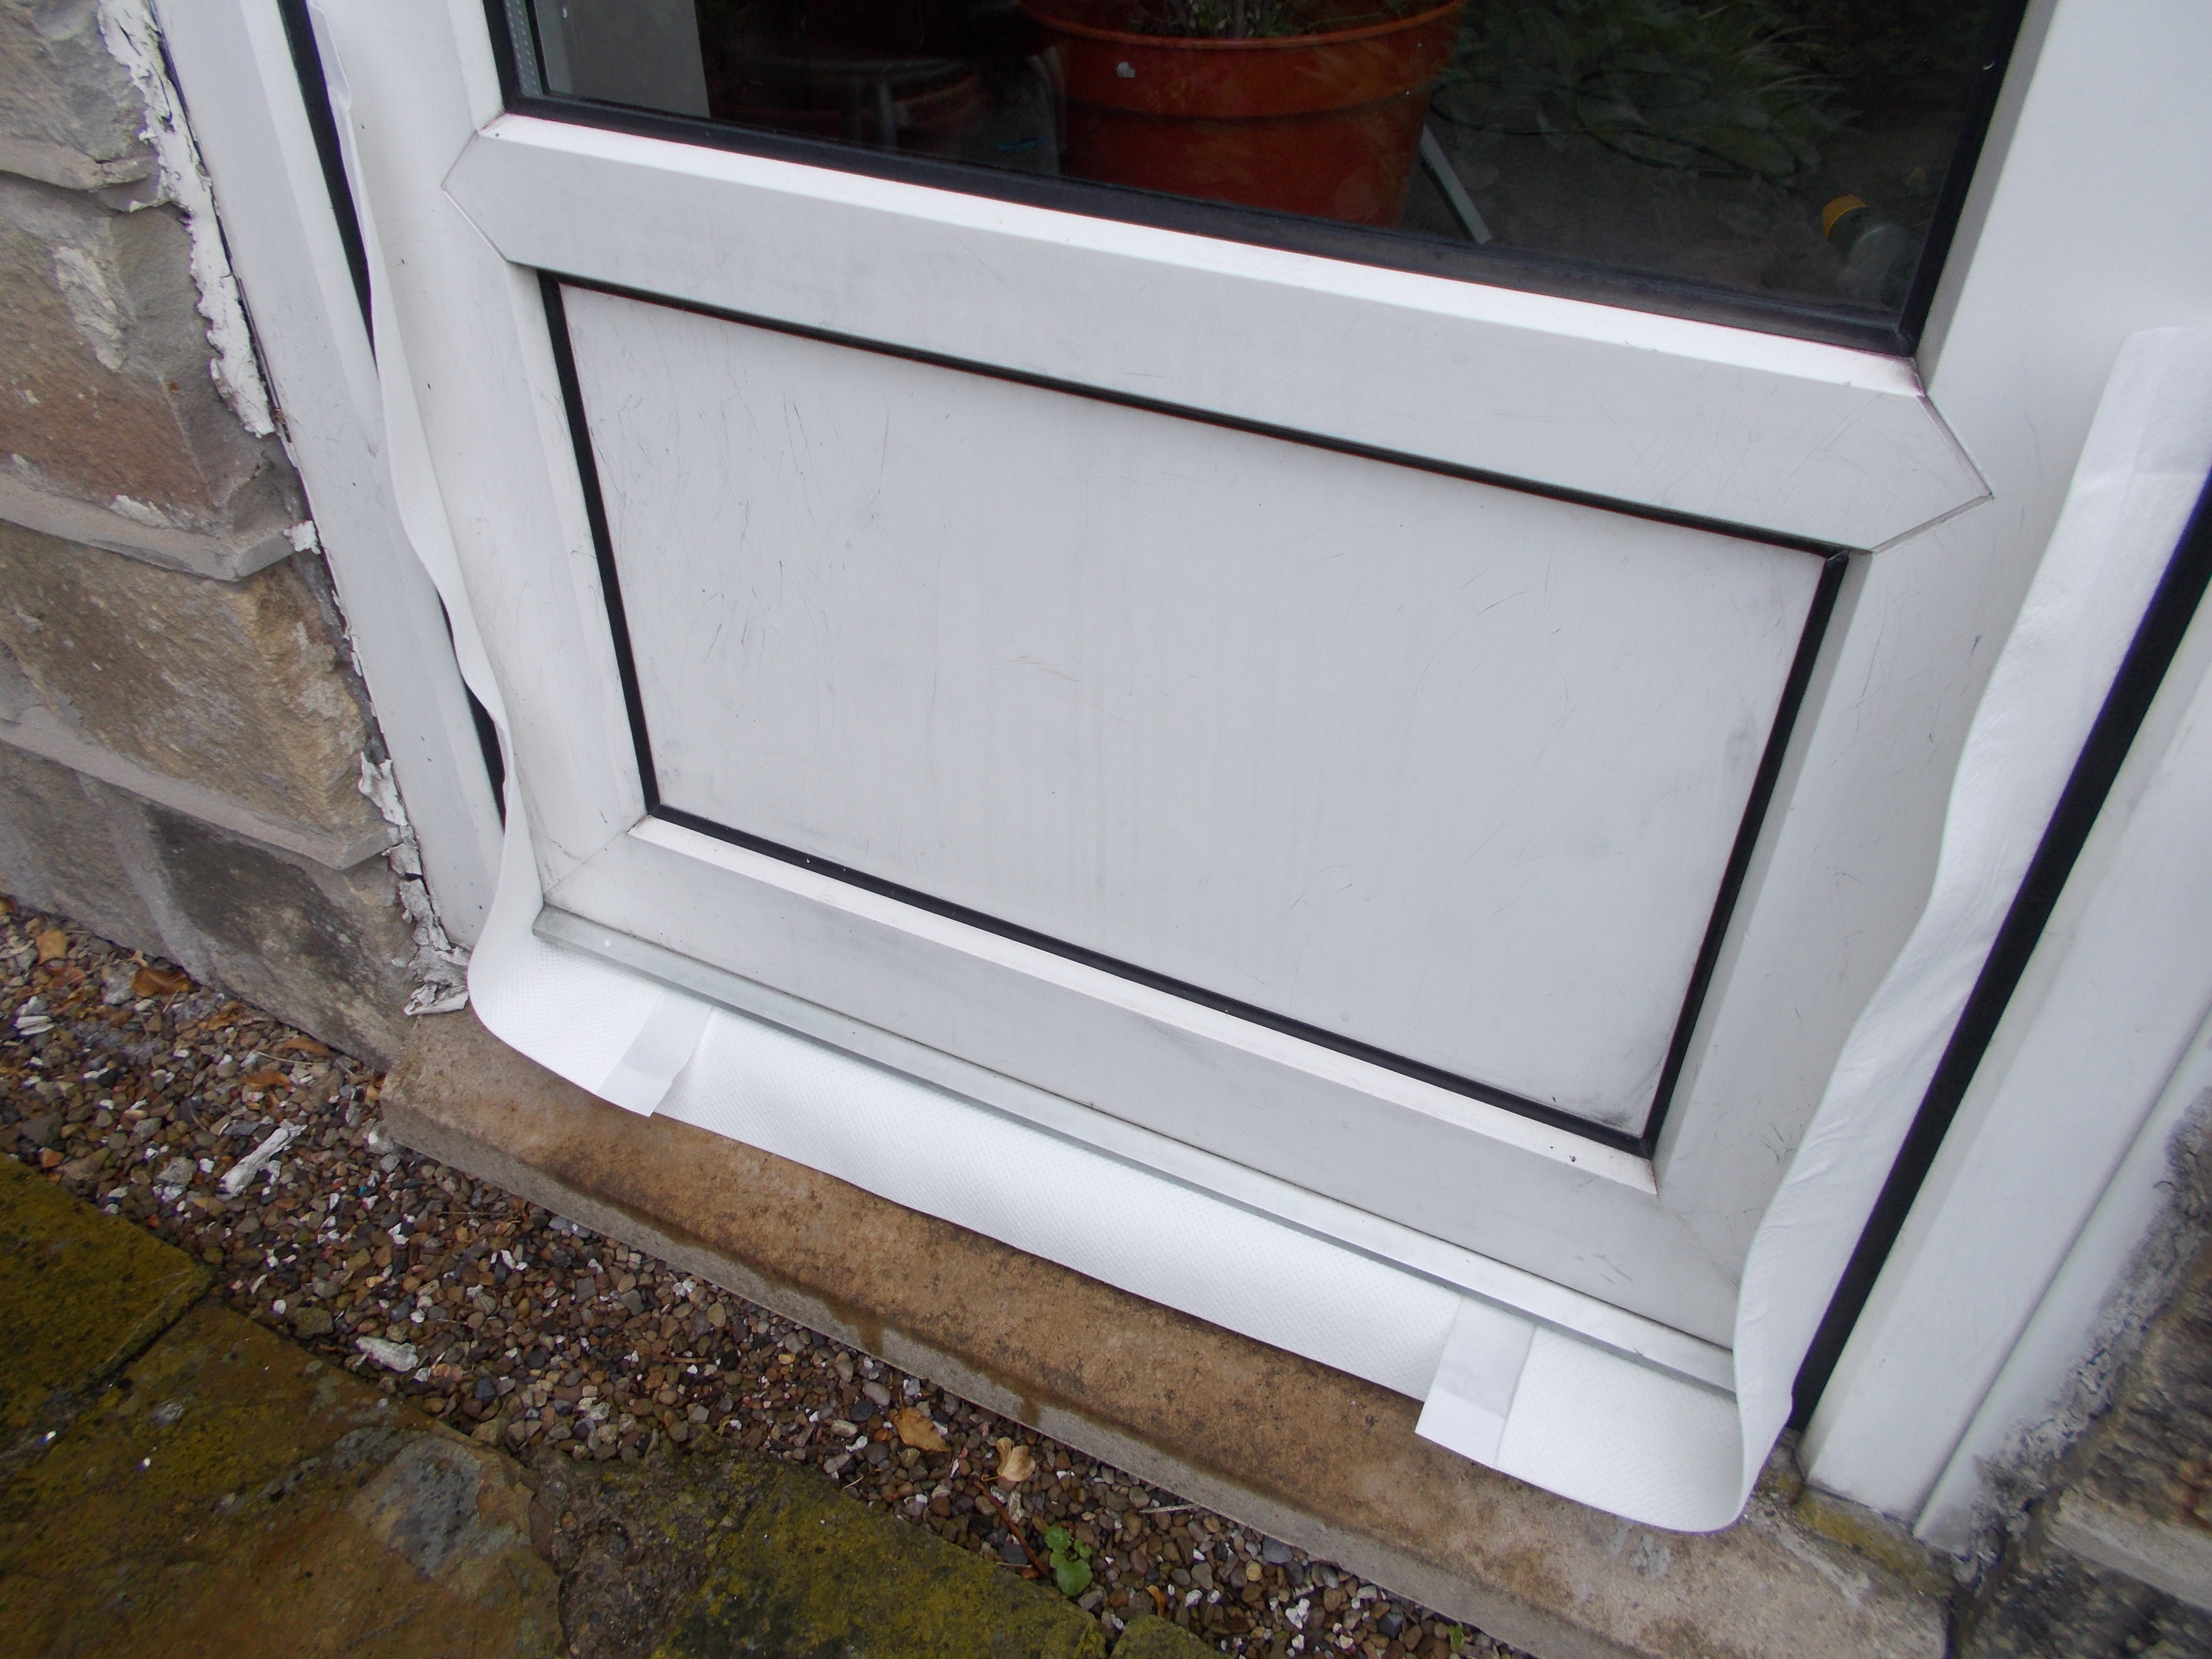 Flood Traps fitted dry around an outside door in preparation for a flood